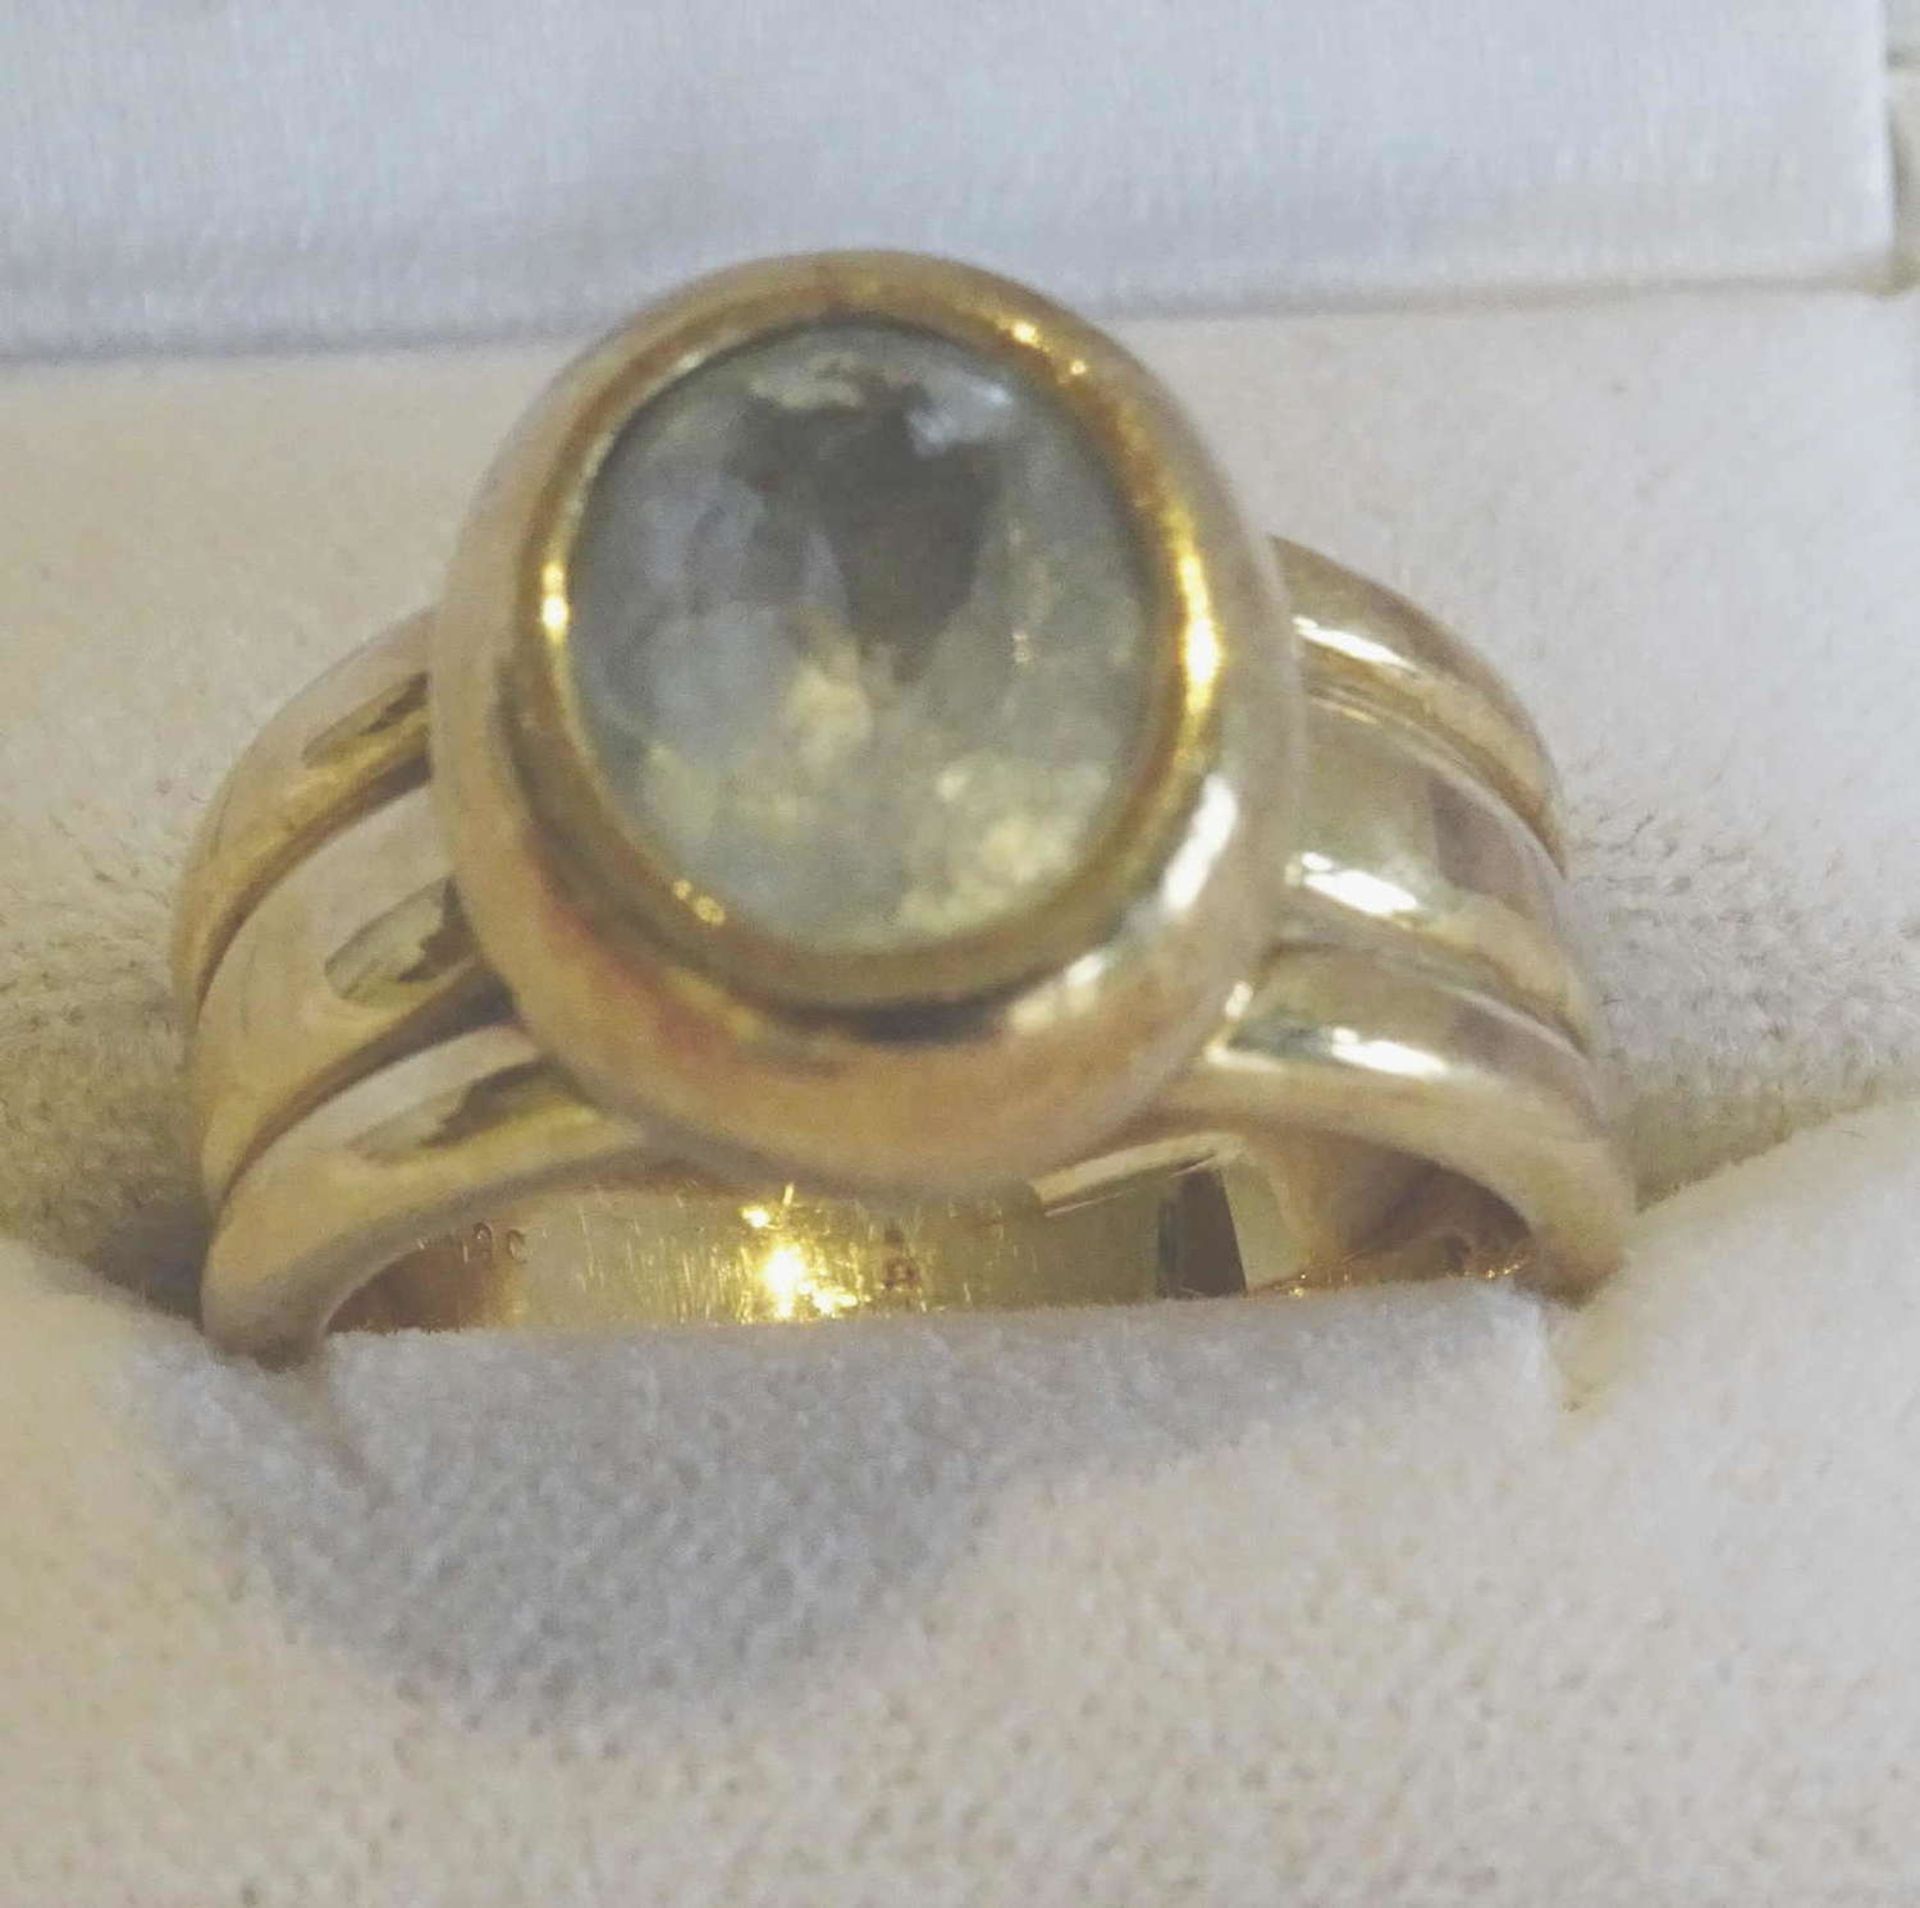 Women's ring, 585 gold, set with 1 aquamarine. Manual work. Ring size 54.Weight approx. 14.4